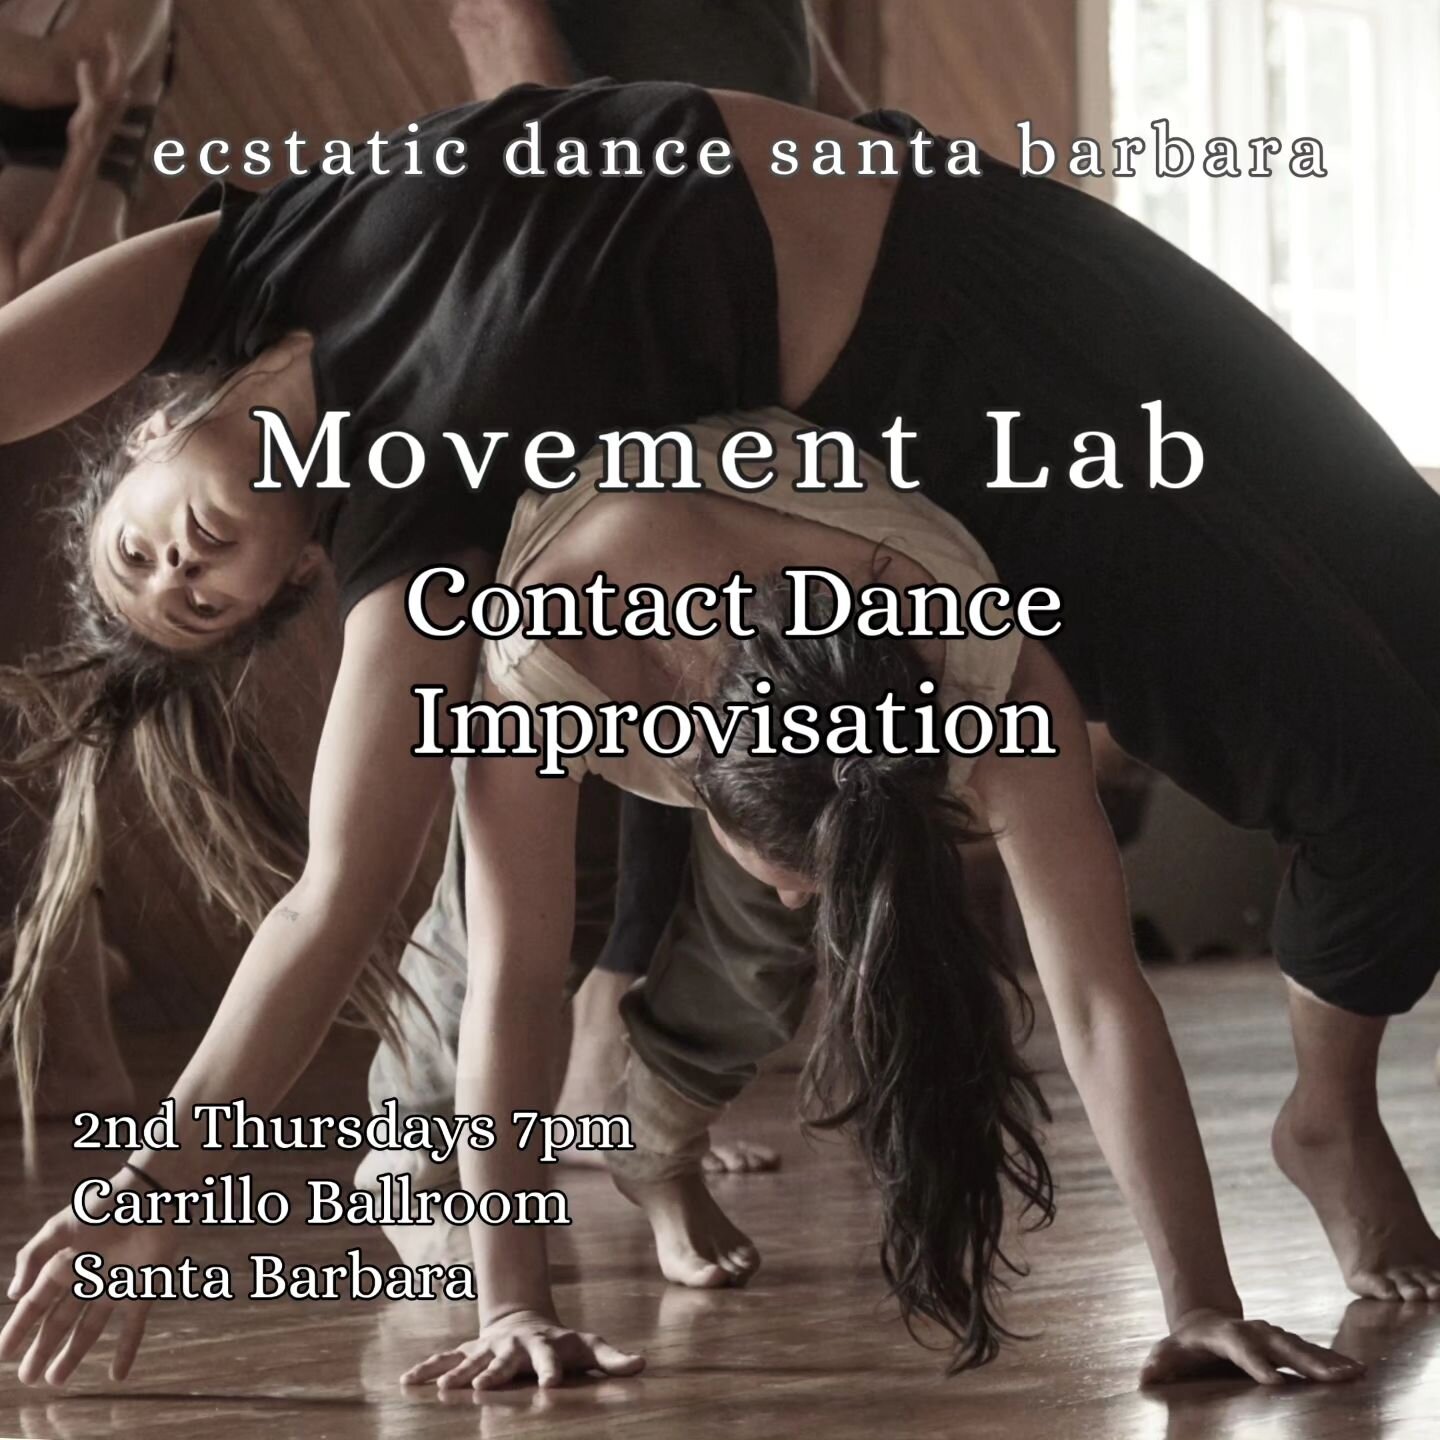 Every SECOND Thursday
7pm Movement Lab
Contact Improv Jam 

Movement Lab is a space where we dance, play, move and have full permission to get weird. There is class at 7pm on Contact Improvisation and some other basic movement techniques, followed by